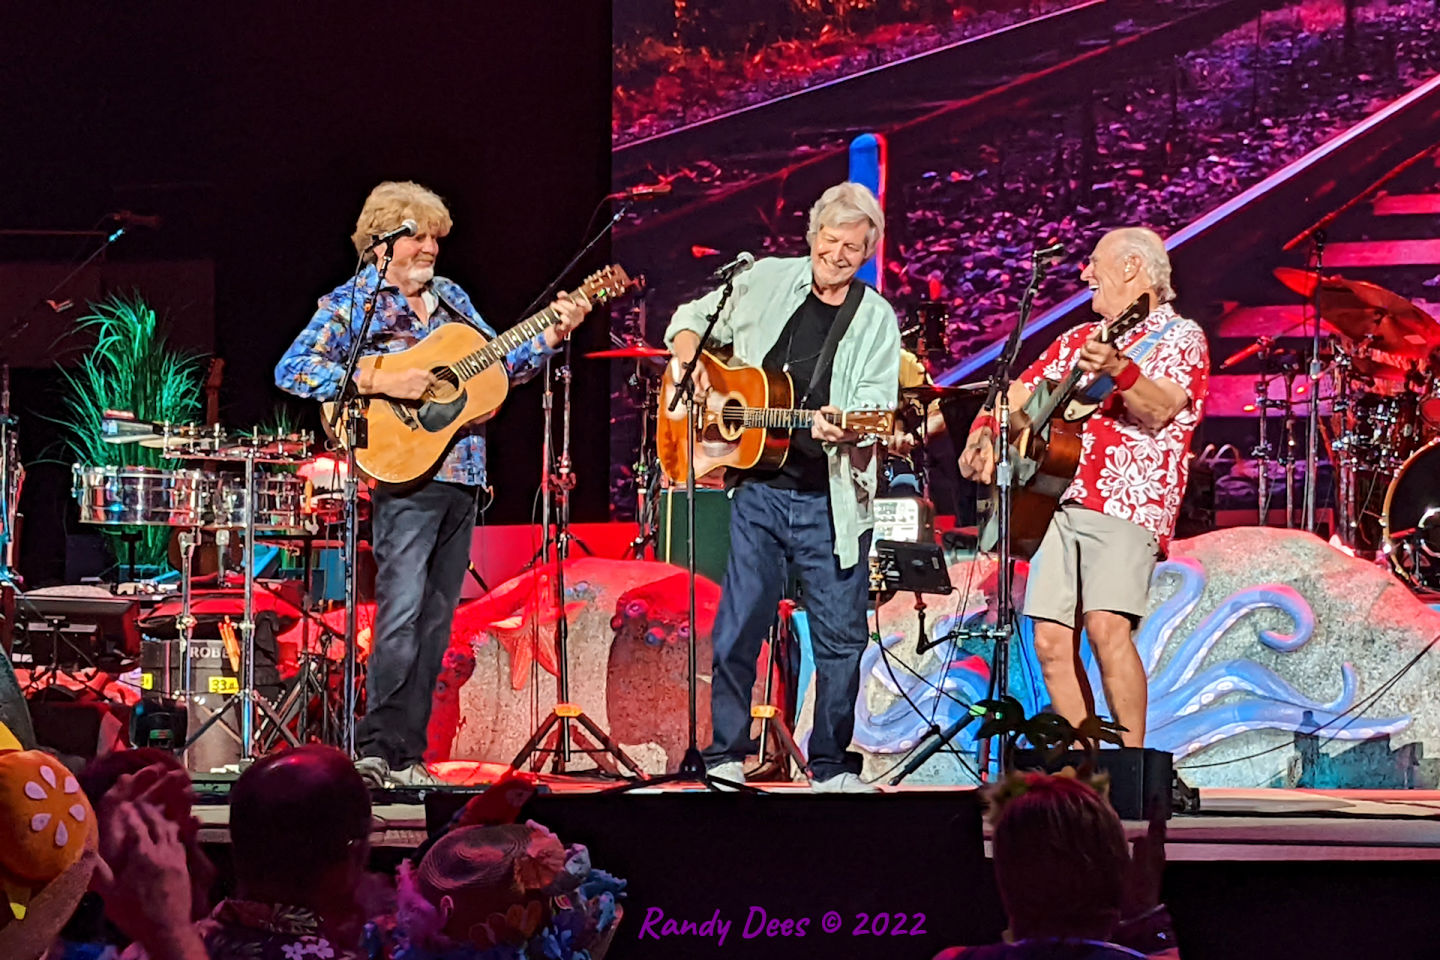 Jimmy Buffett and the Coral Reefer Band